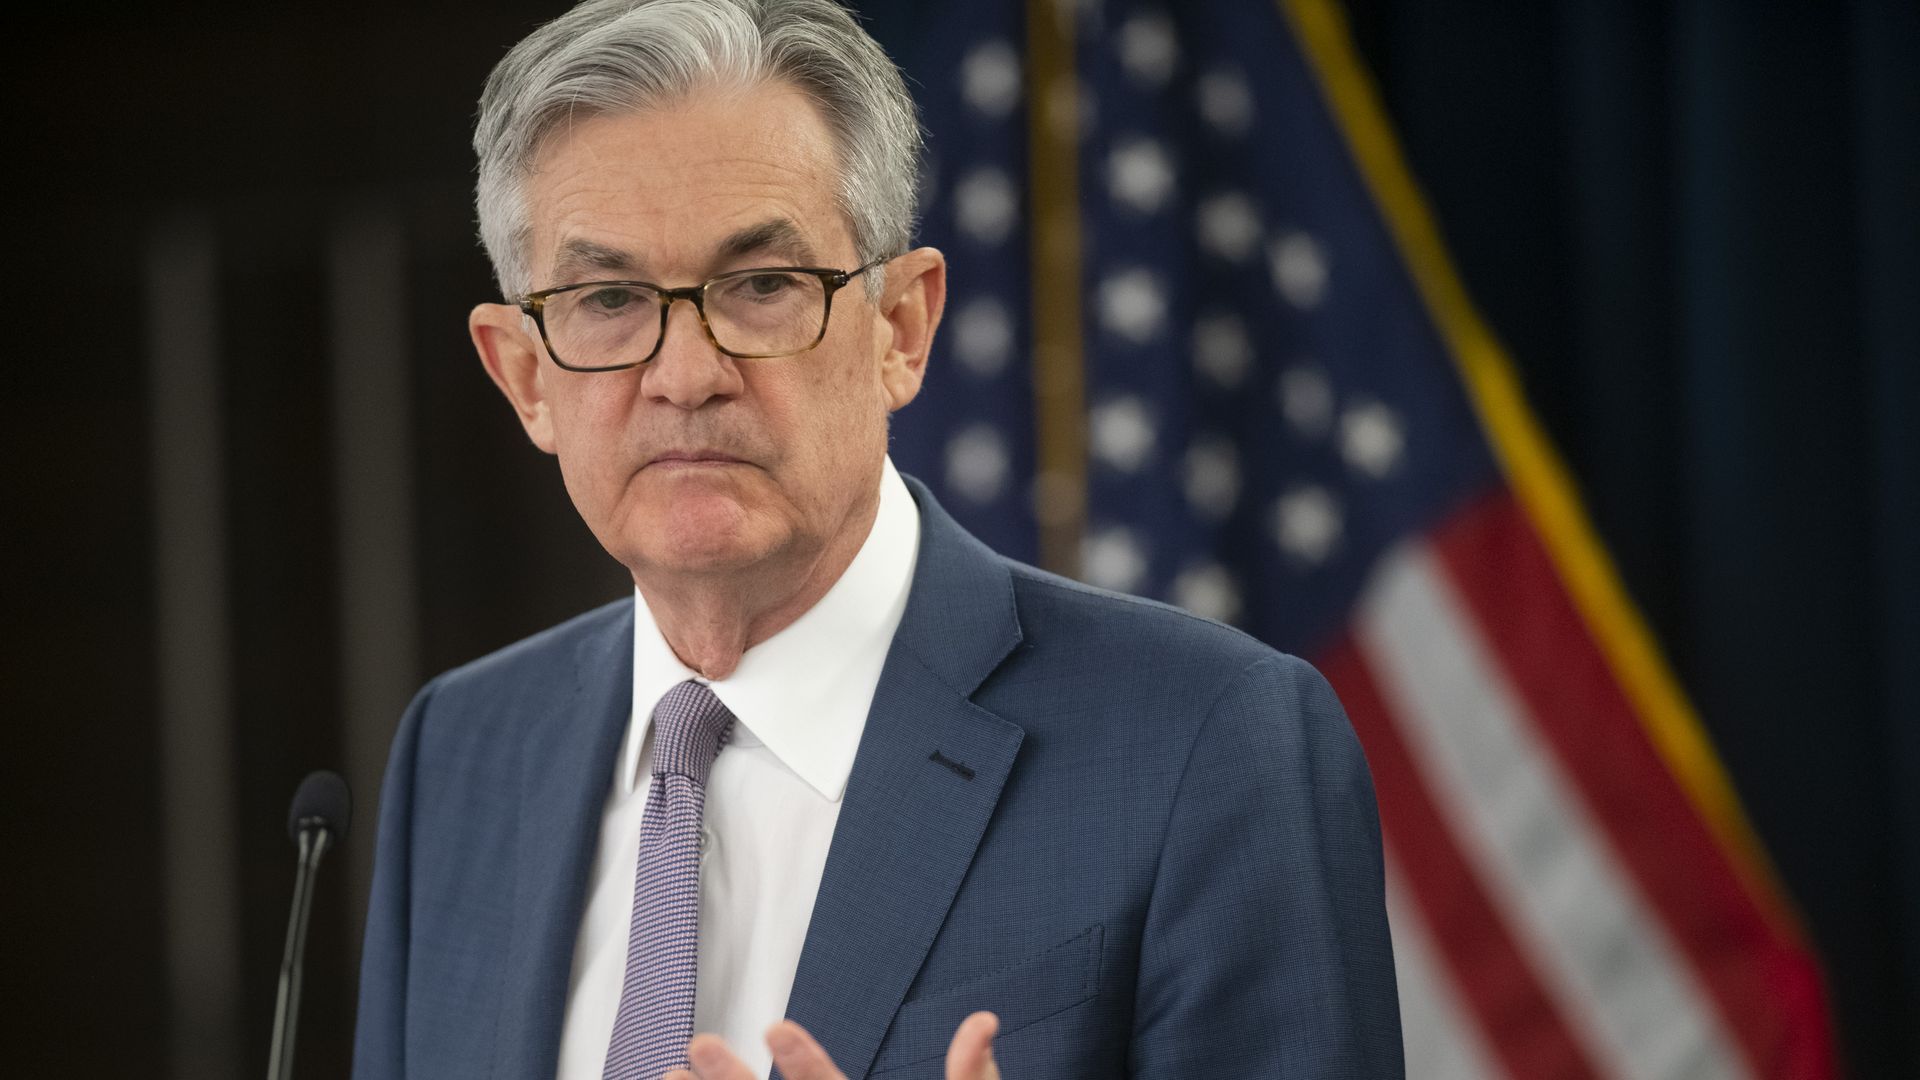 Fed chairman Jerome Powell stands at a podium during a speech on March 3, 2020 i